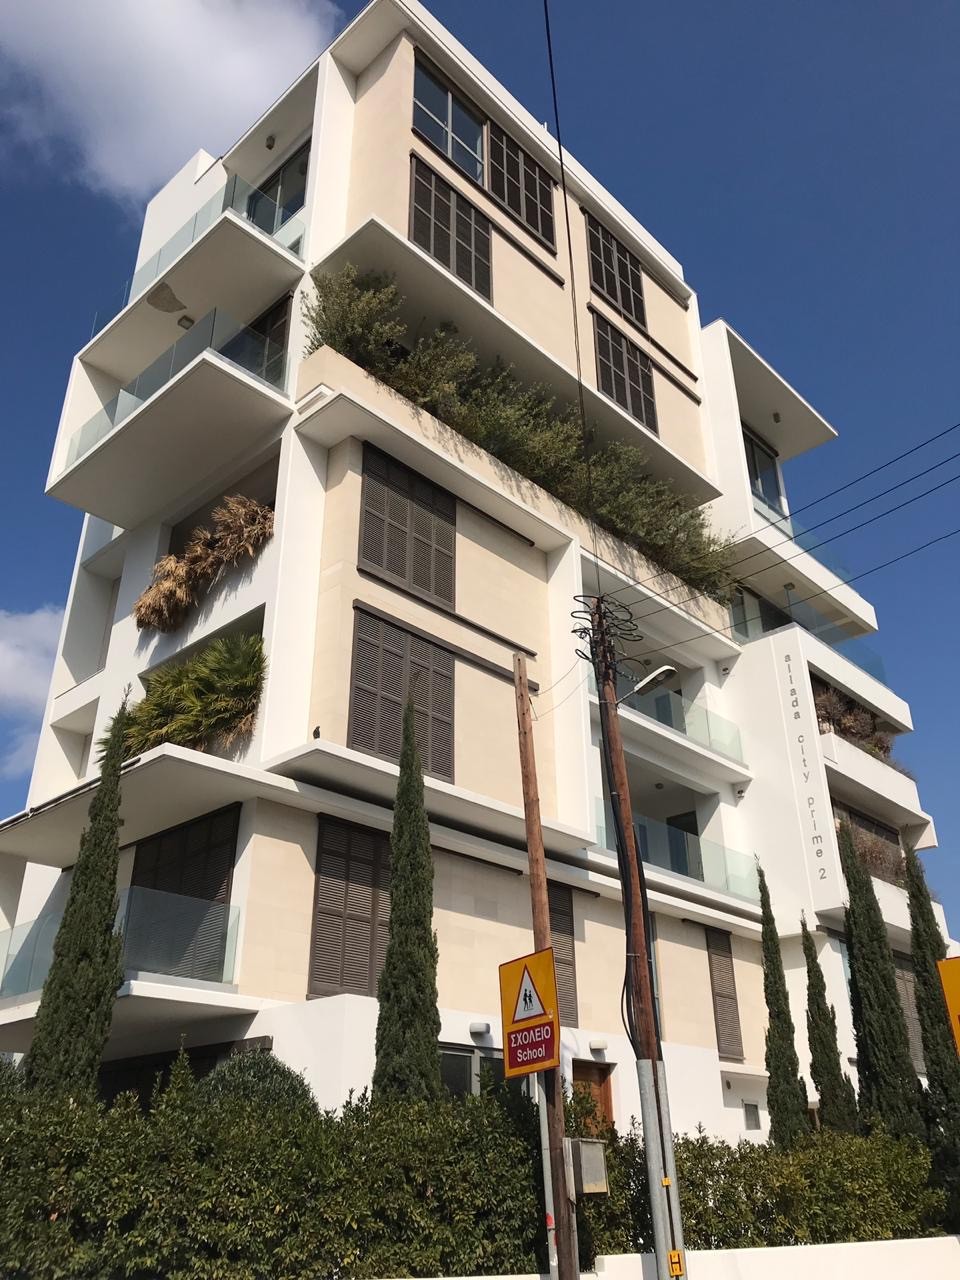 Property for Sale: Apartment (Flat) in City Center, Nicosia  | Key Realtor Cyprus